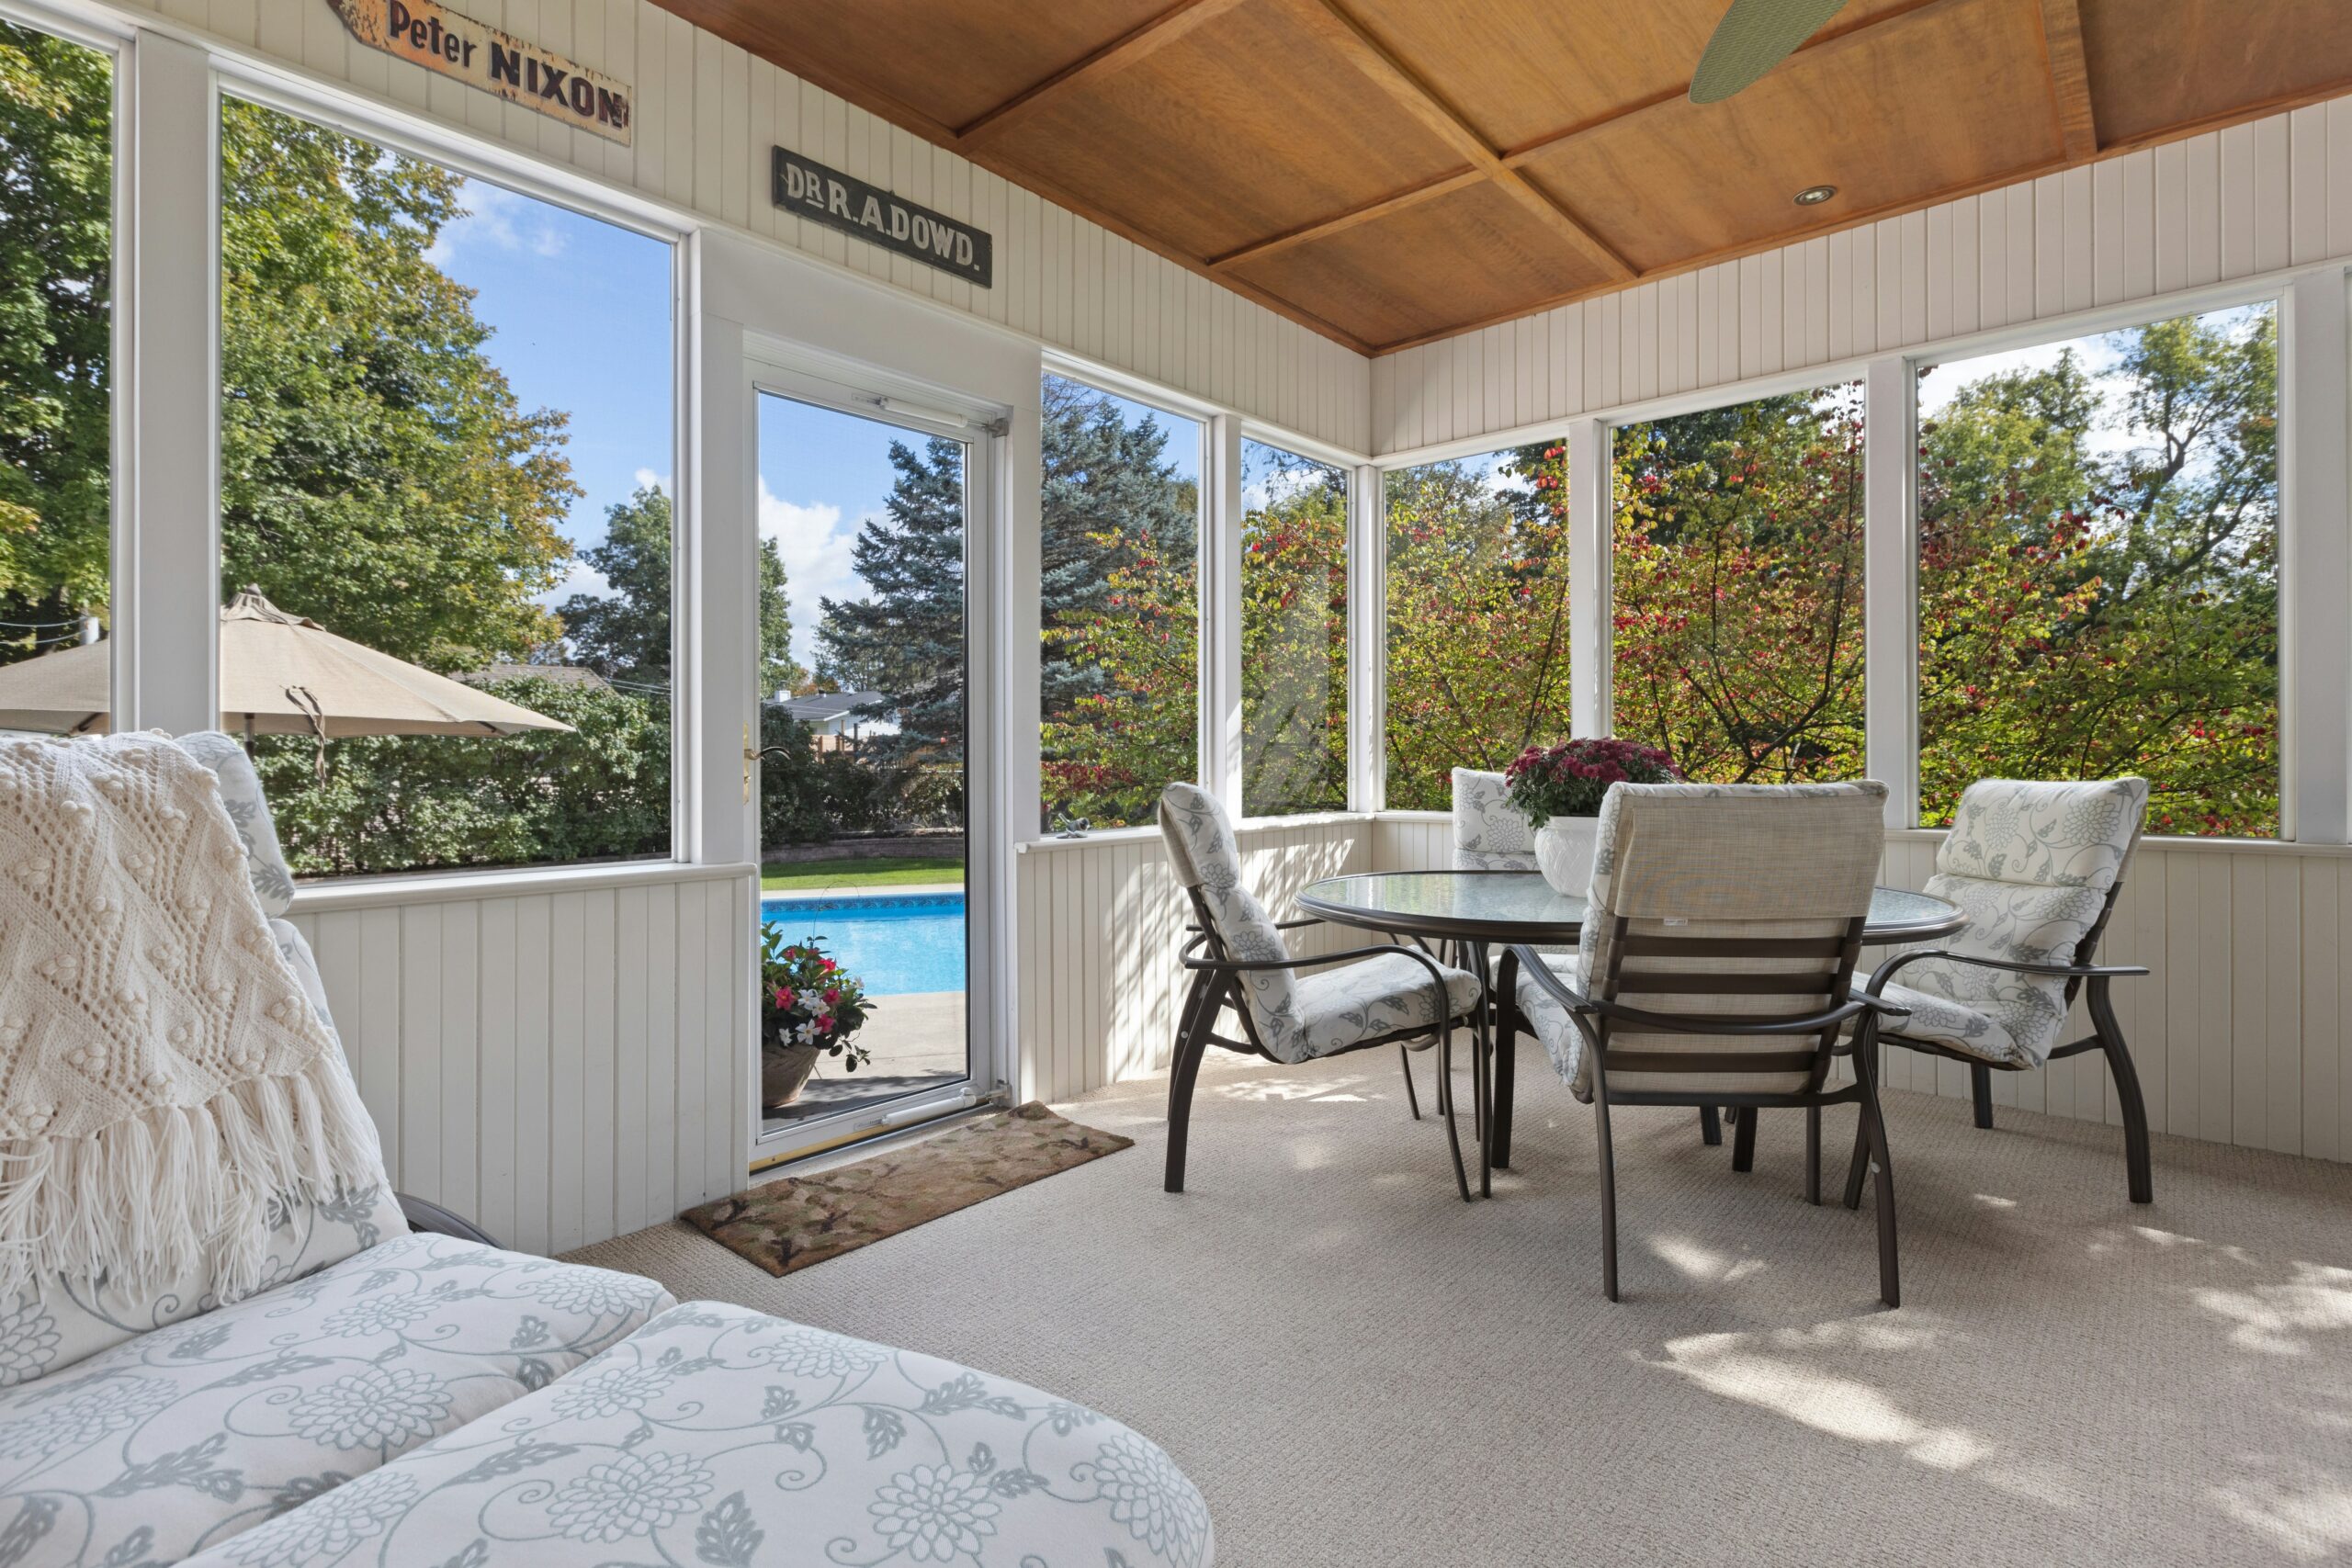 Sun rooms get hot and cold, but a mini-split will make it more comfortable